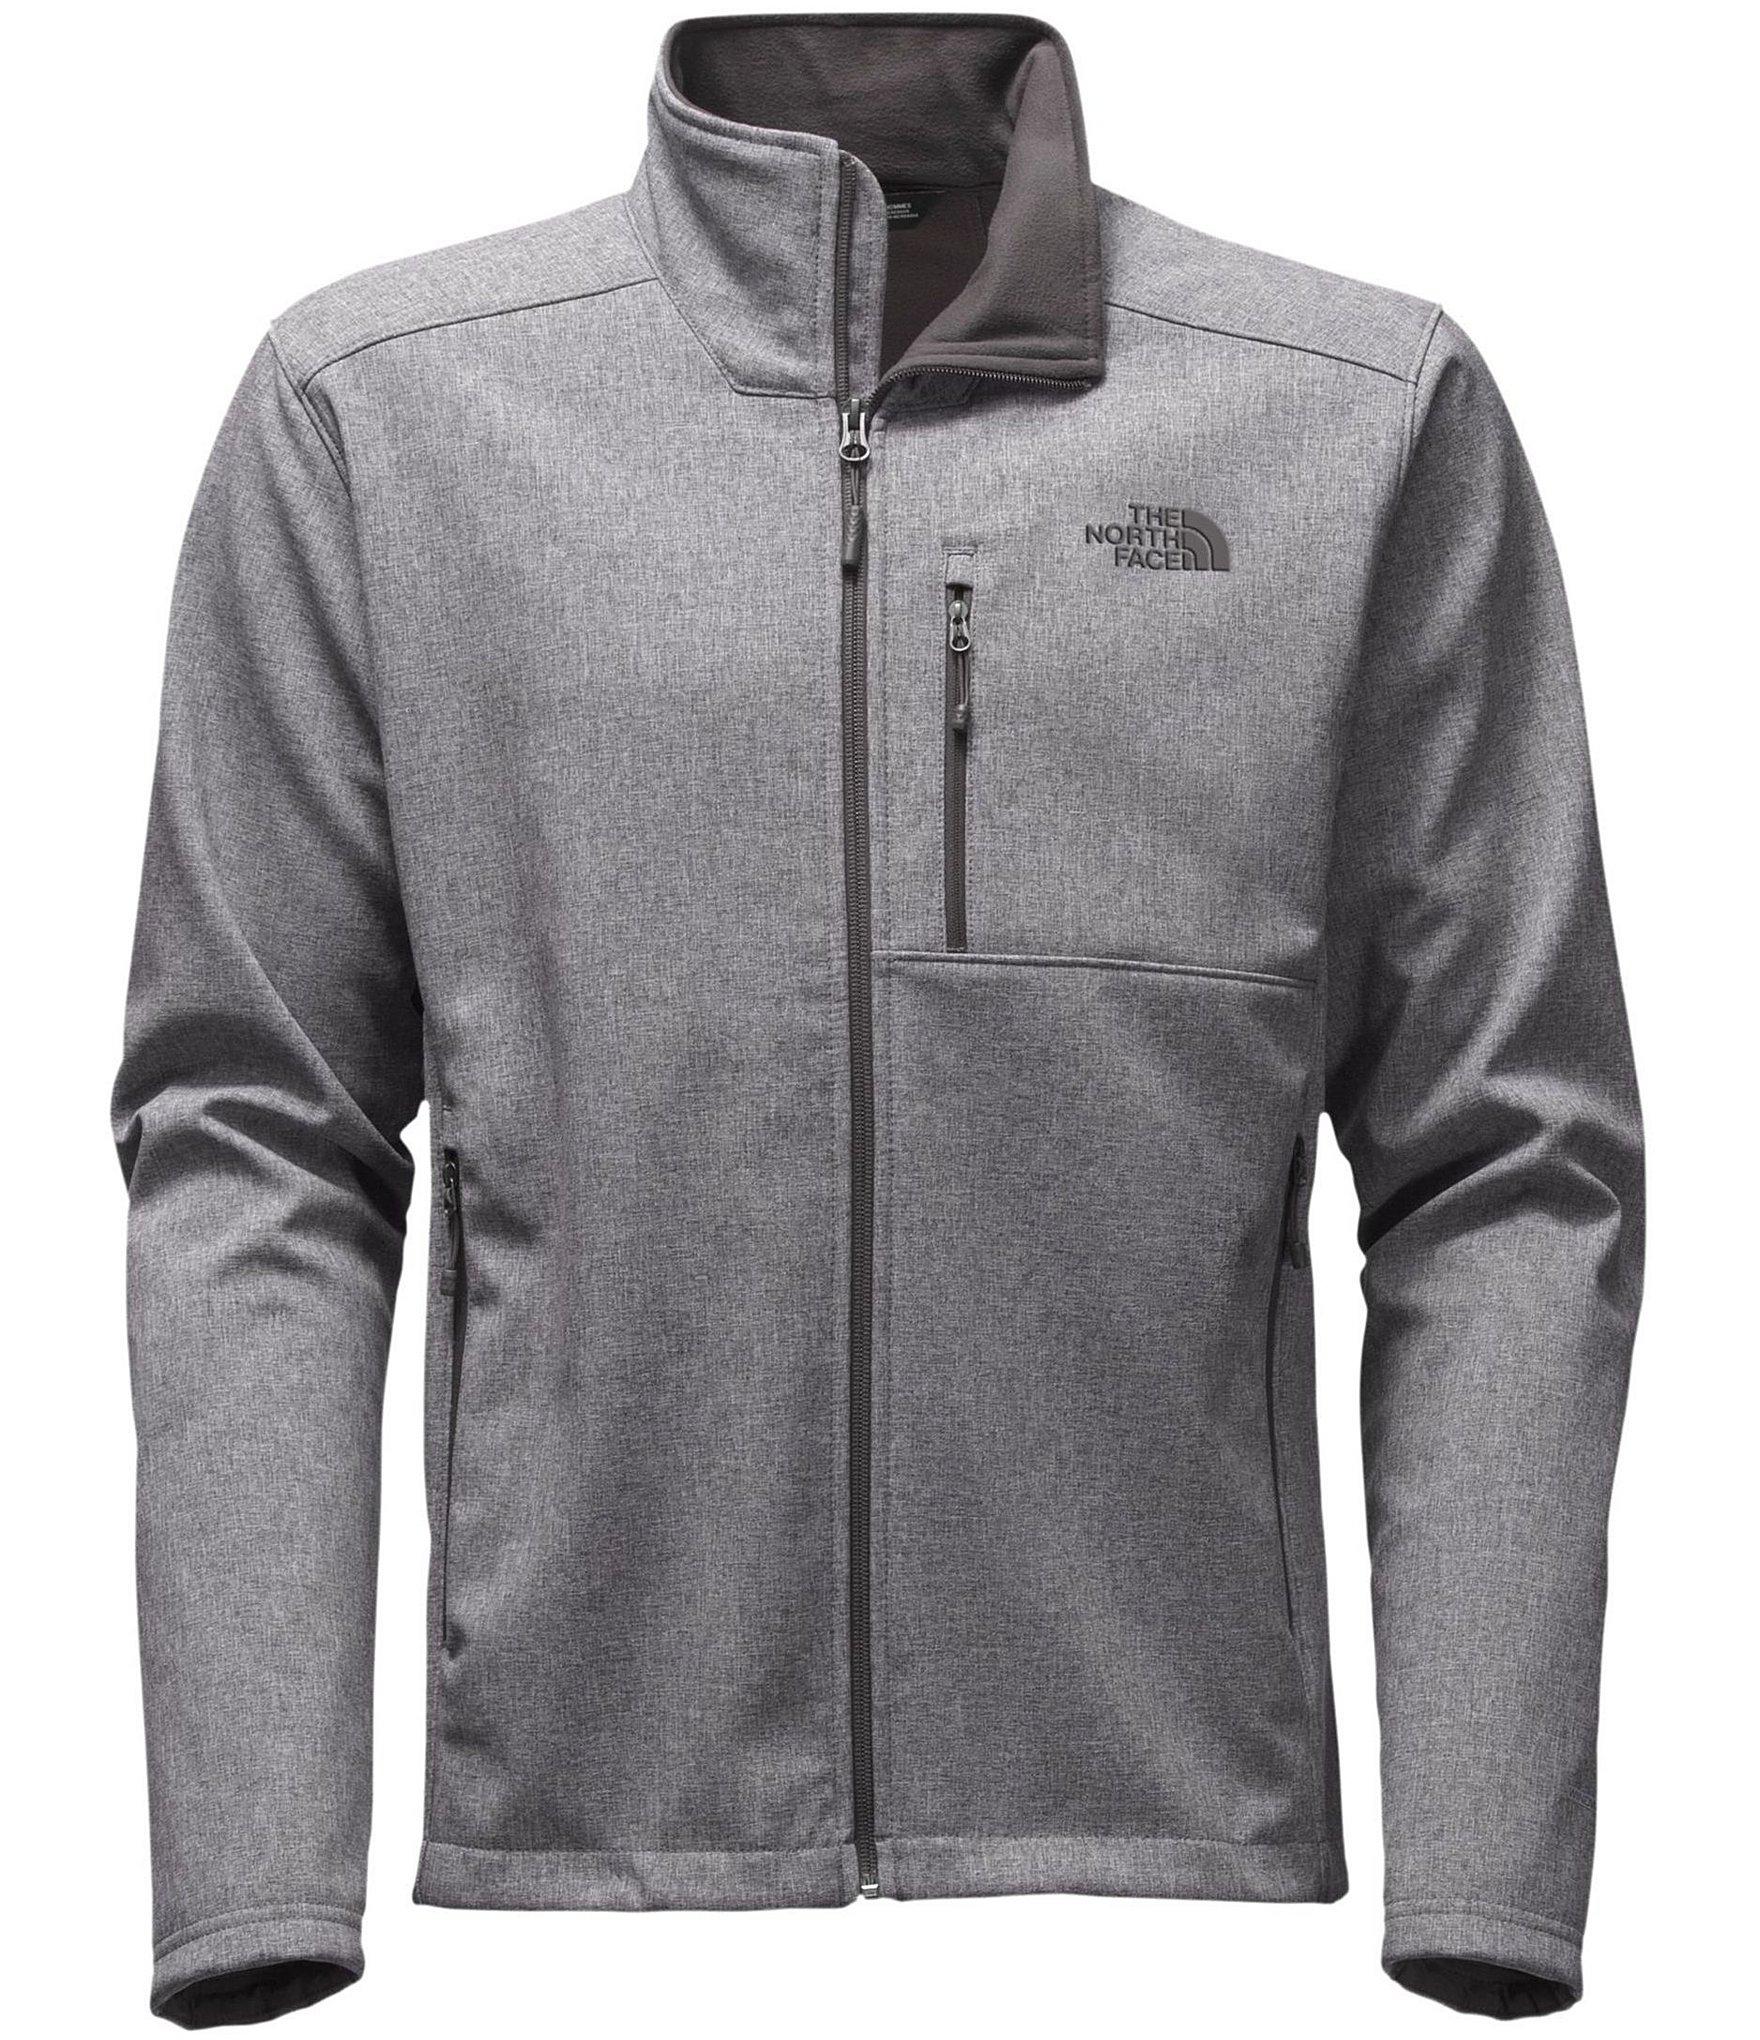 Lyst - The North Face Apex Bionic 2 Mock Neck Full-zip Jacket in Gray ...